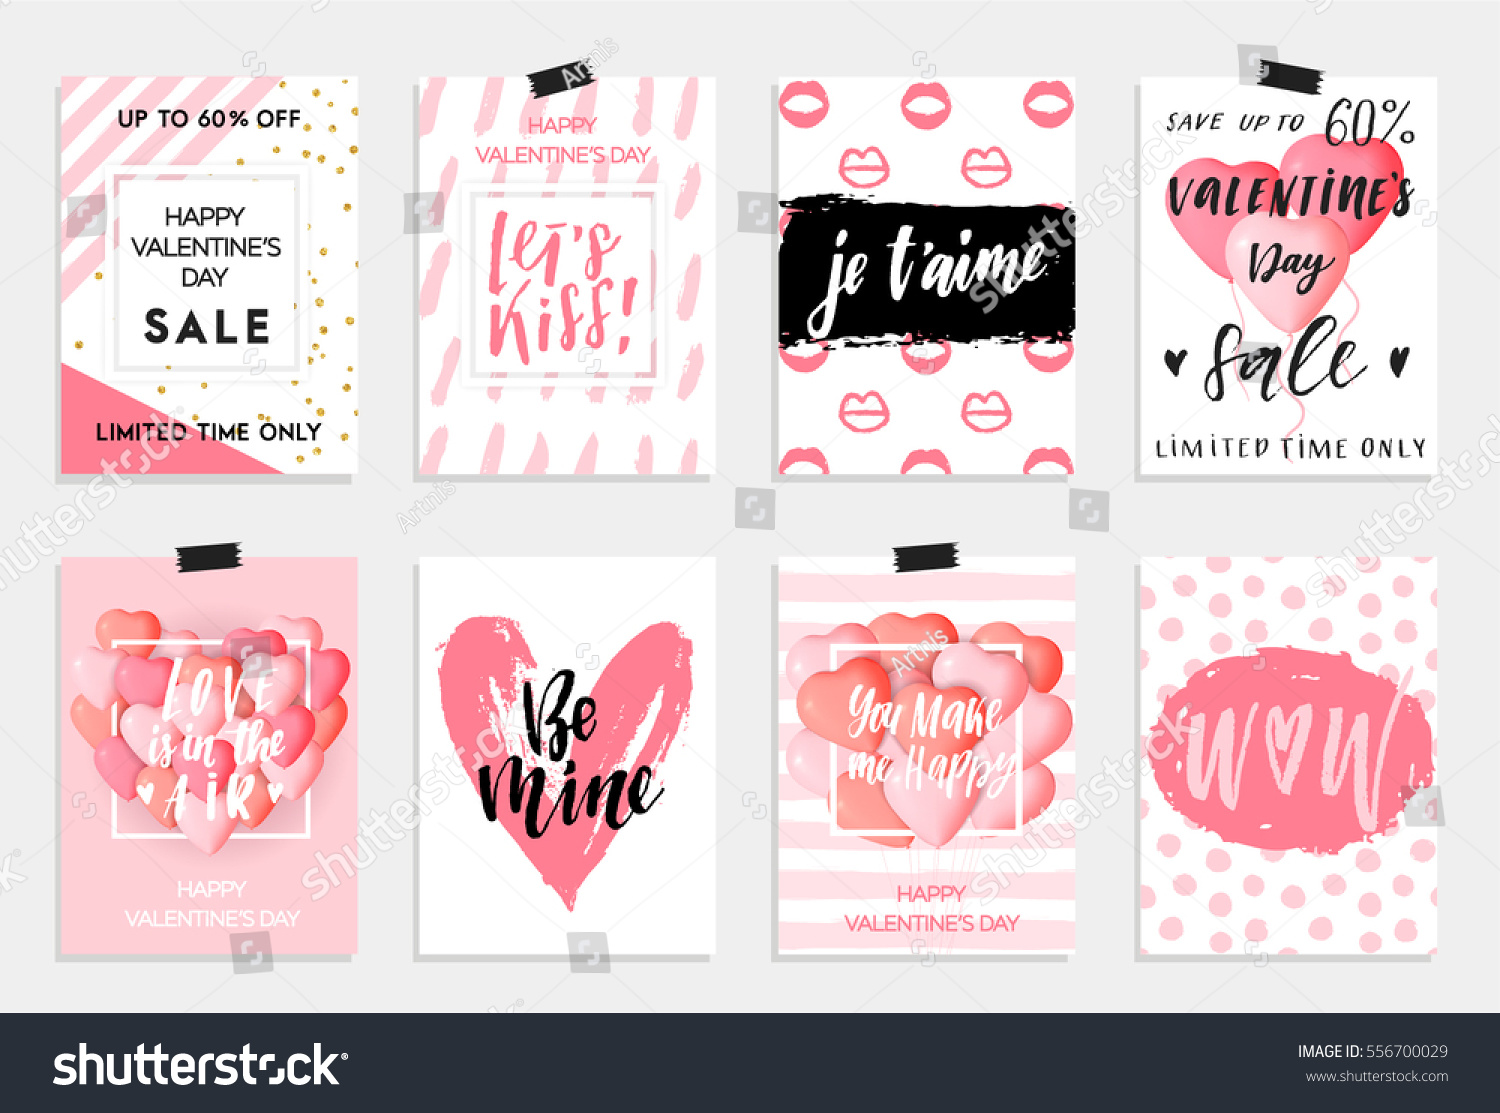 Collection of pink, black, white colored Valentine's day card, sale and other flyer templates with lettering.  Typography poster, card, label, banner design set. Vector illustration EPS10 #556700029